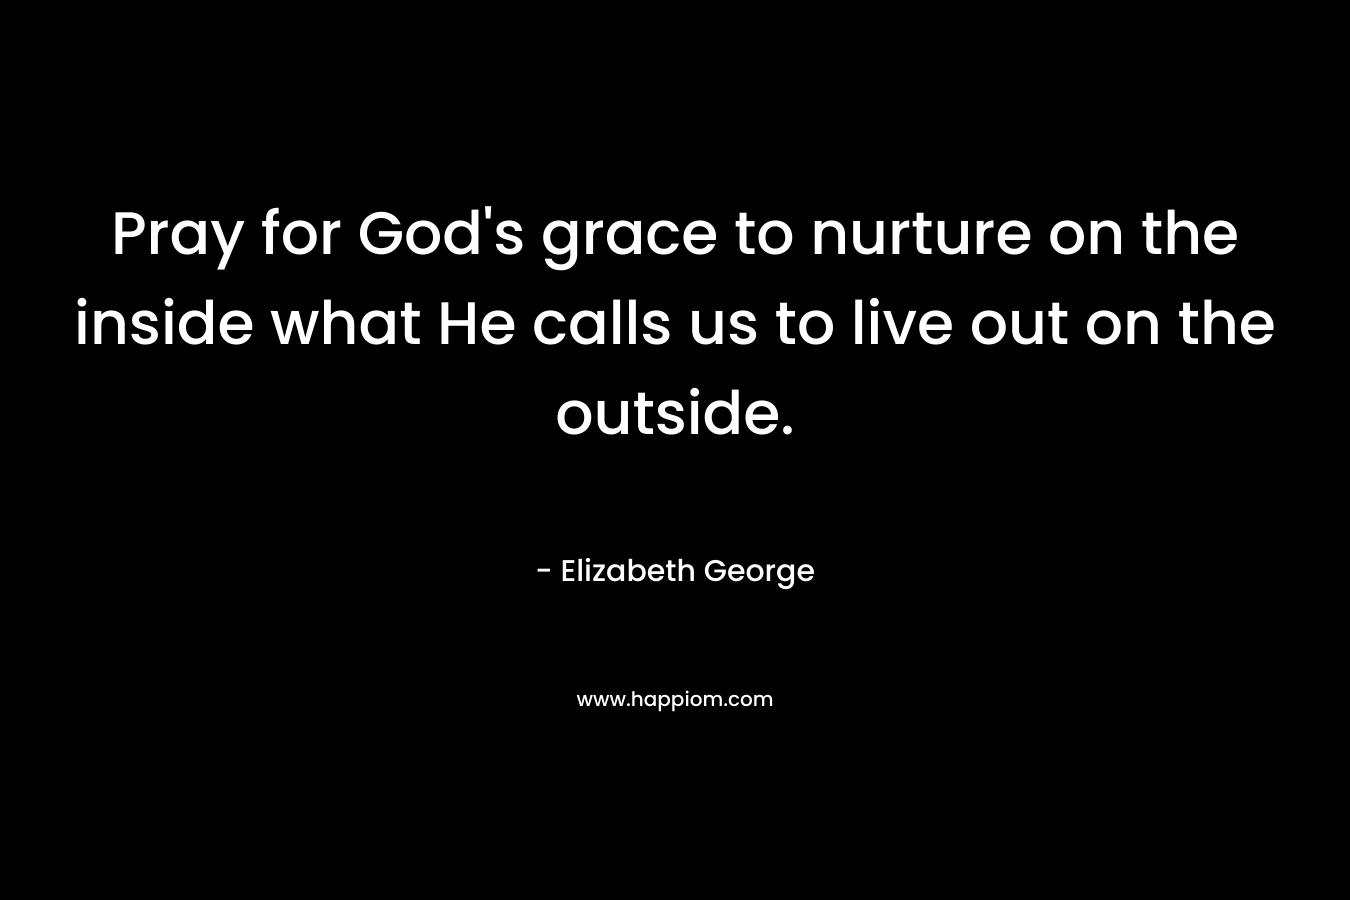 Pray for God's grace to nurture on the inside what He calls us to live out on the outside.